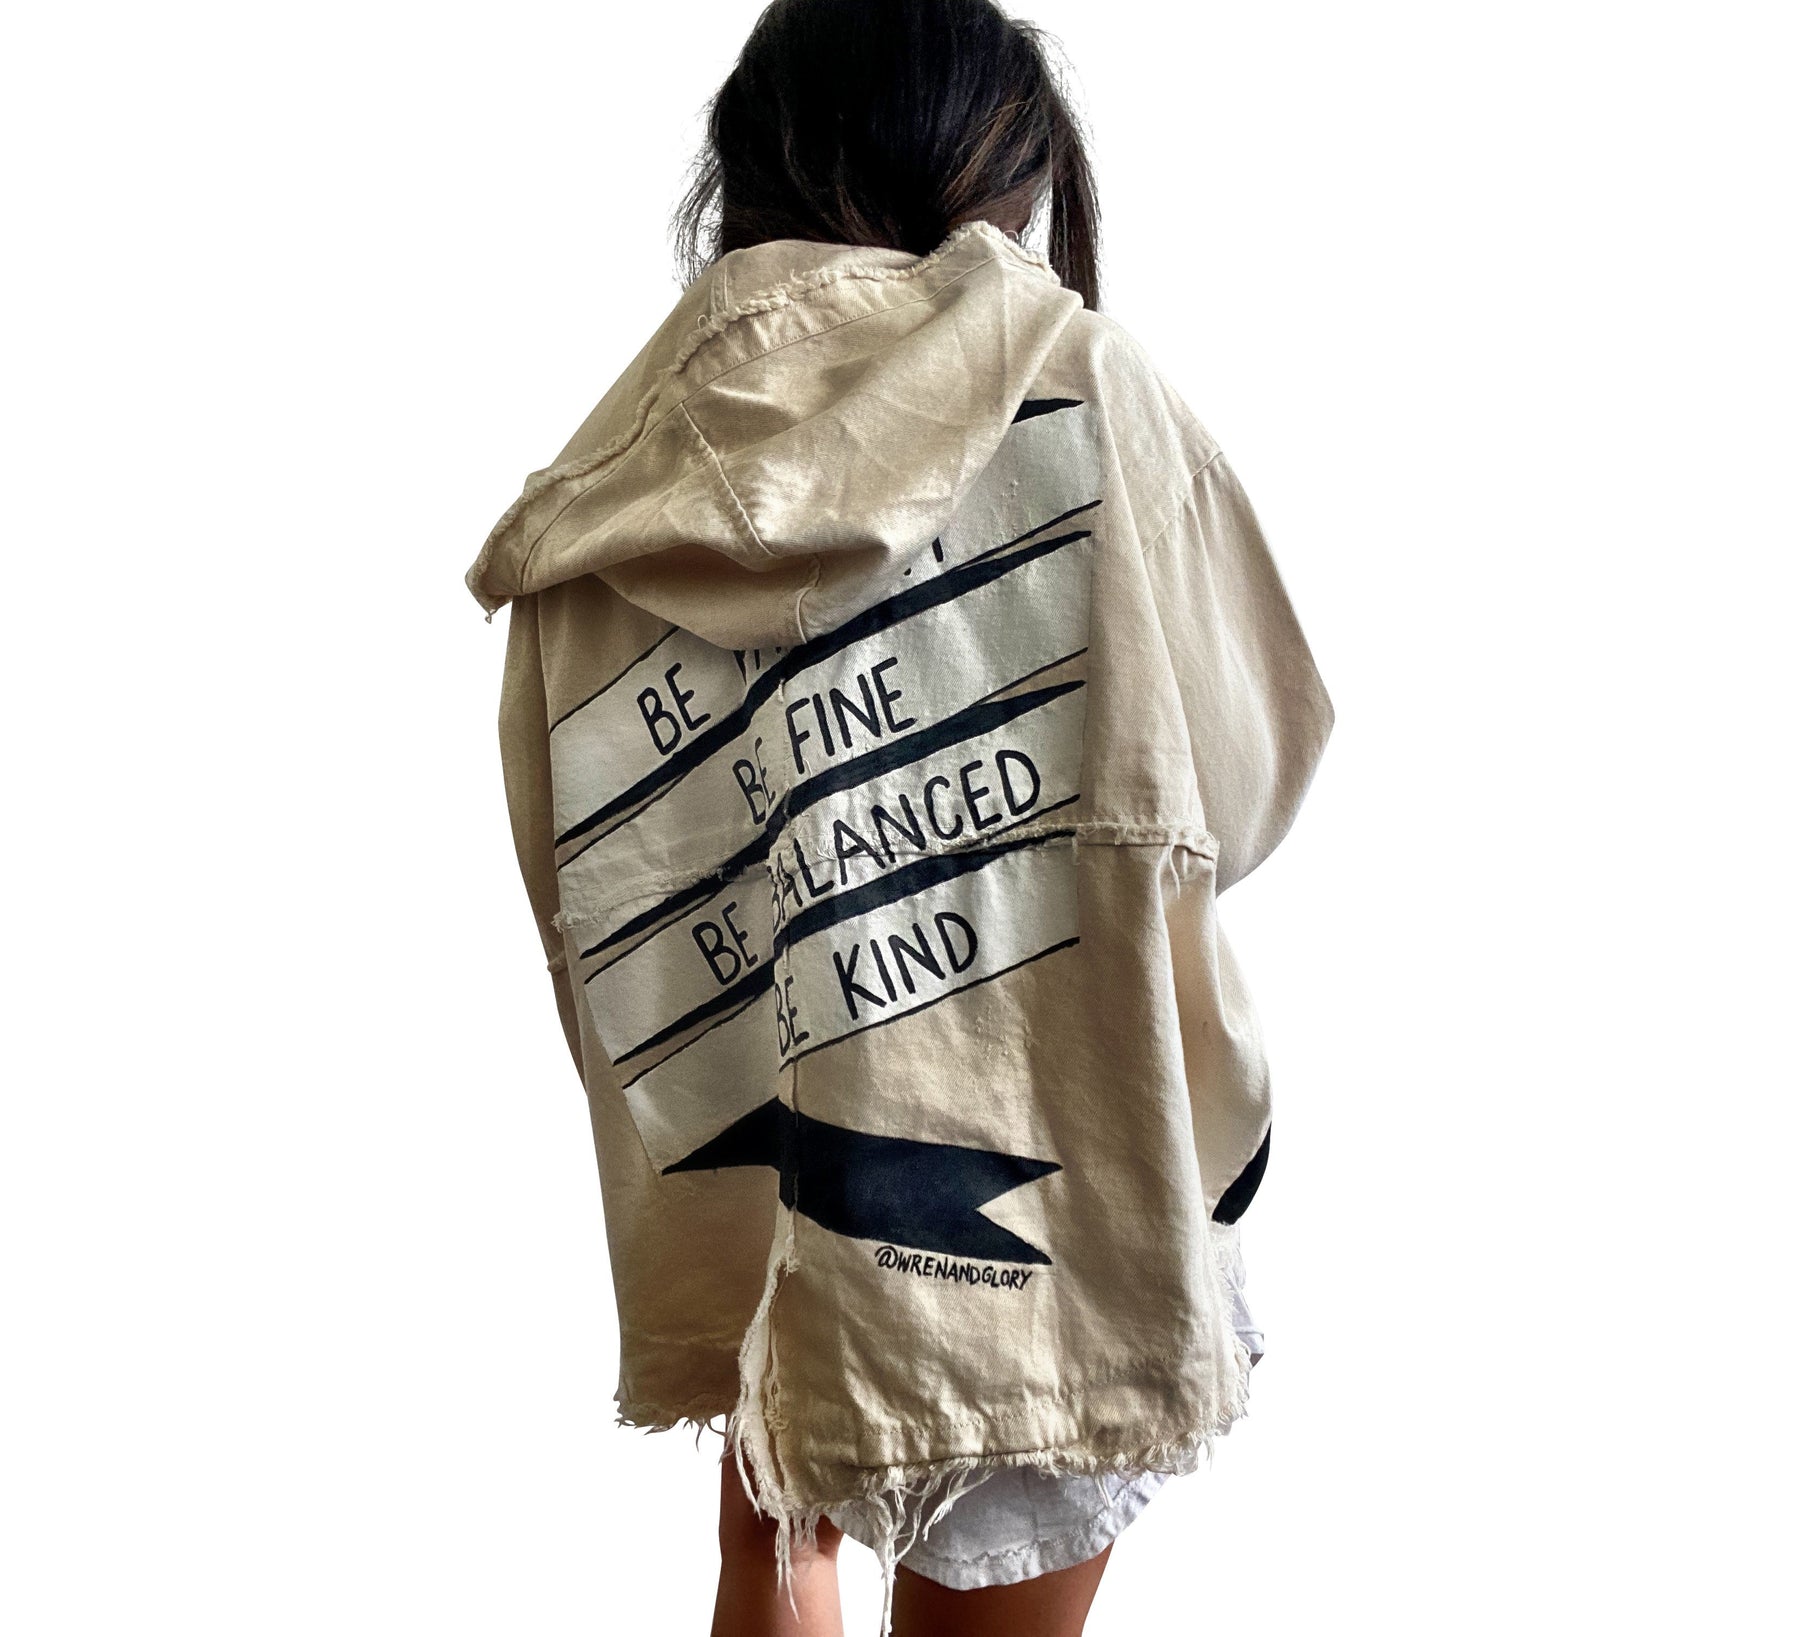 Beige hooded denim jacket. BE PATIENT, BE FINE, BE BALANCED, BE KIND painted on back, in a black and white banner. Signed @wrenandglory.